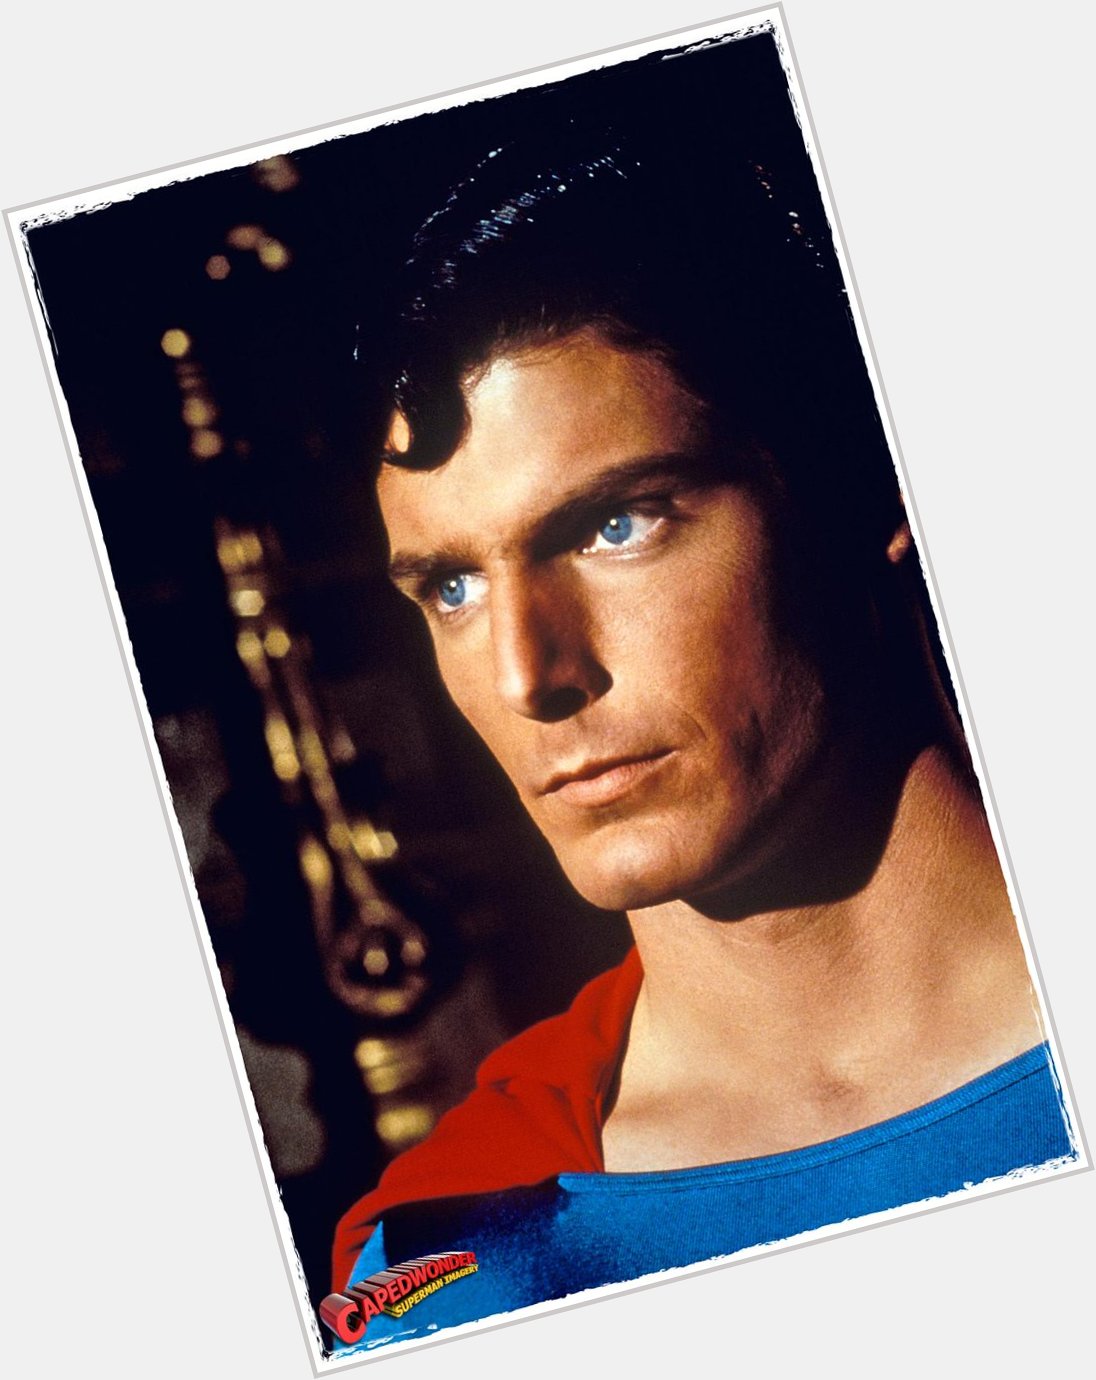 Happy 63rd Bday to a super man: Christopher Reeve! He made me believe I could fly via a receiving blanket as a cape! 